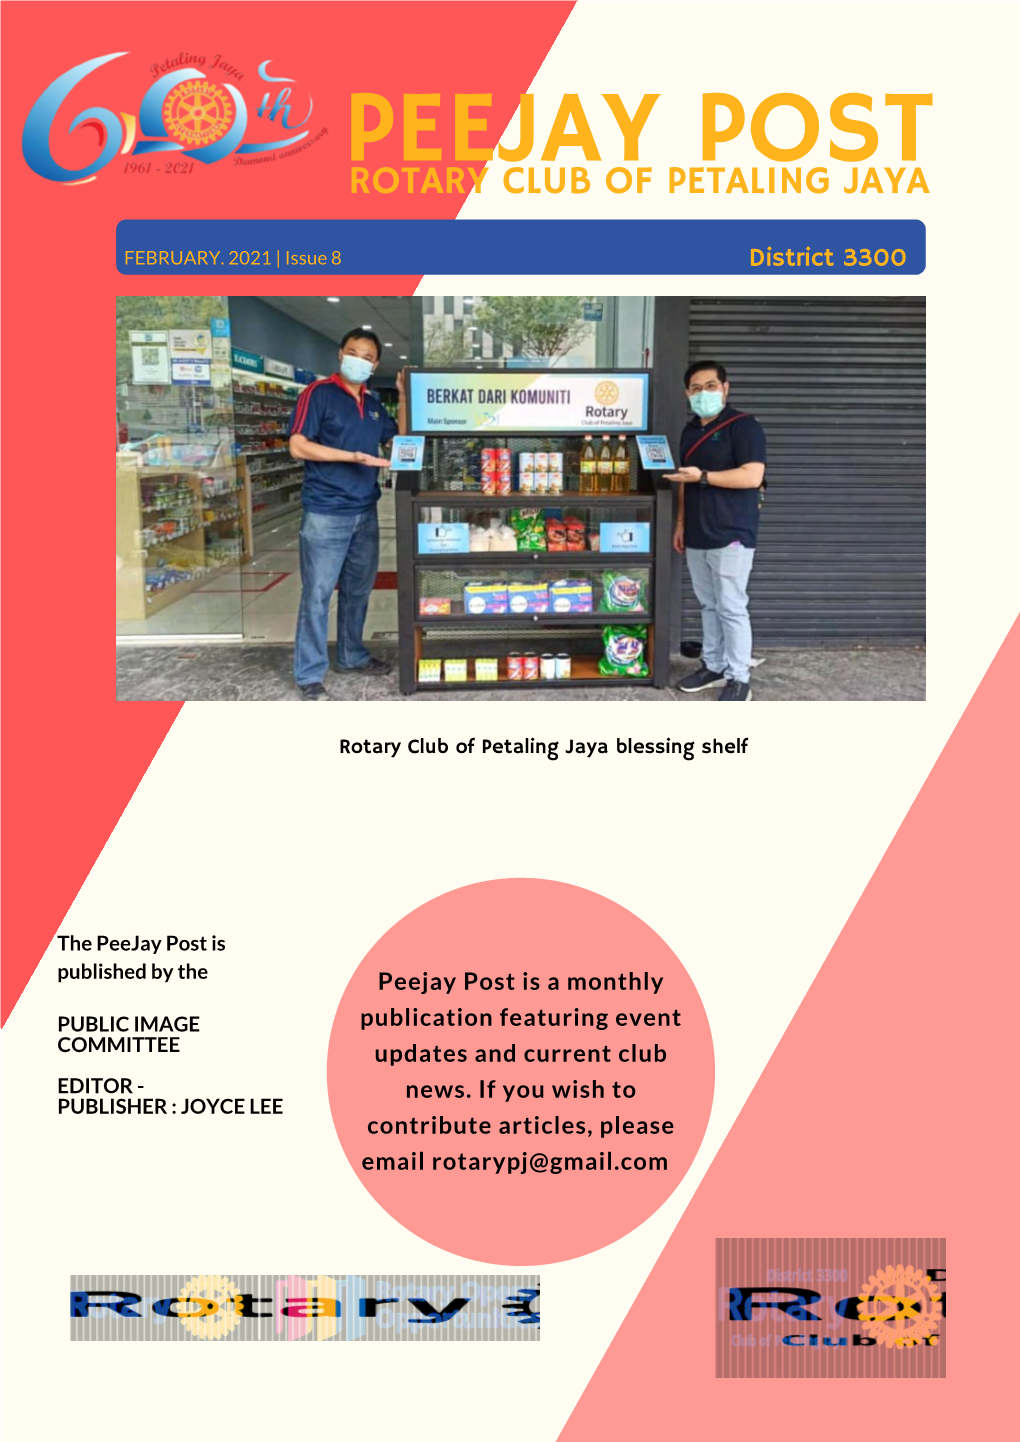 Peejay Post Is Published by the Peejay Post Is a Monthly PUBLIC IMAGE Publication Featuring Event COMMITTEE Updates and Current Club EDITOR - News